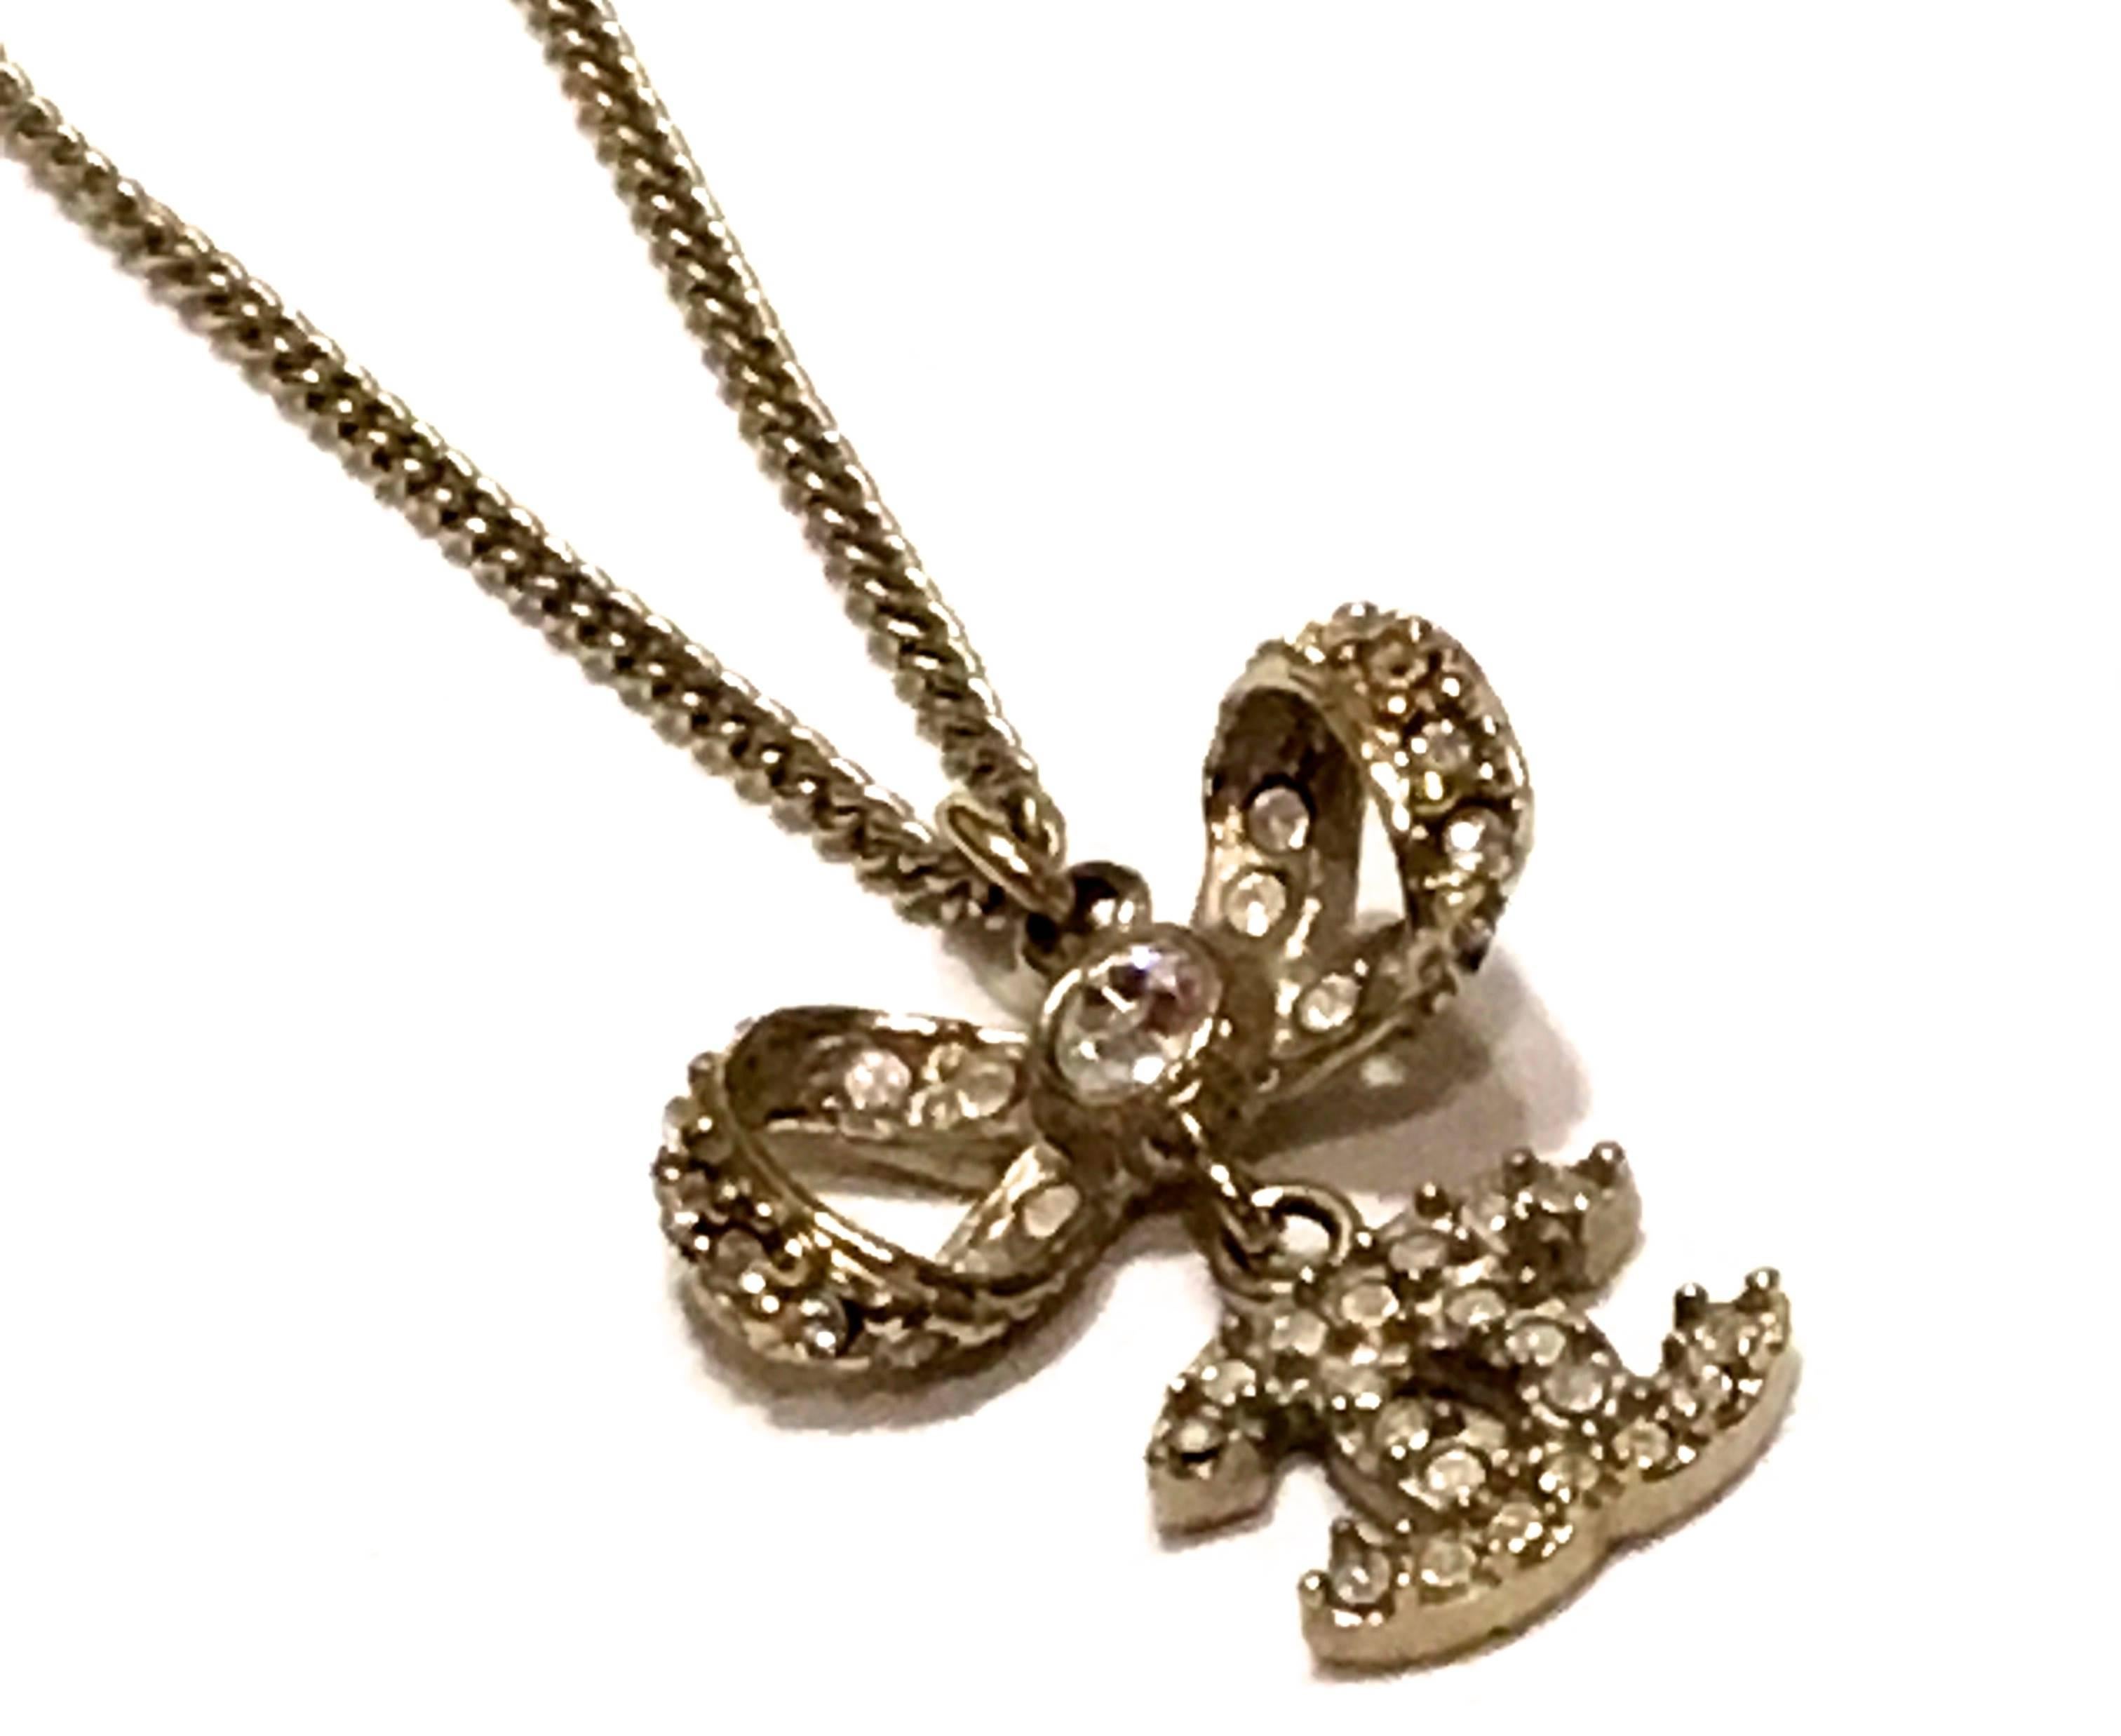 Presented here is a beautiful charm necklace from Chanel. This necklace has a beautiful finely woven gold tone metal chain. On the chain, there is a gold tone metal bow encrusted with clear rhinestones. There is a dangling iconic CC logo linked to